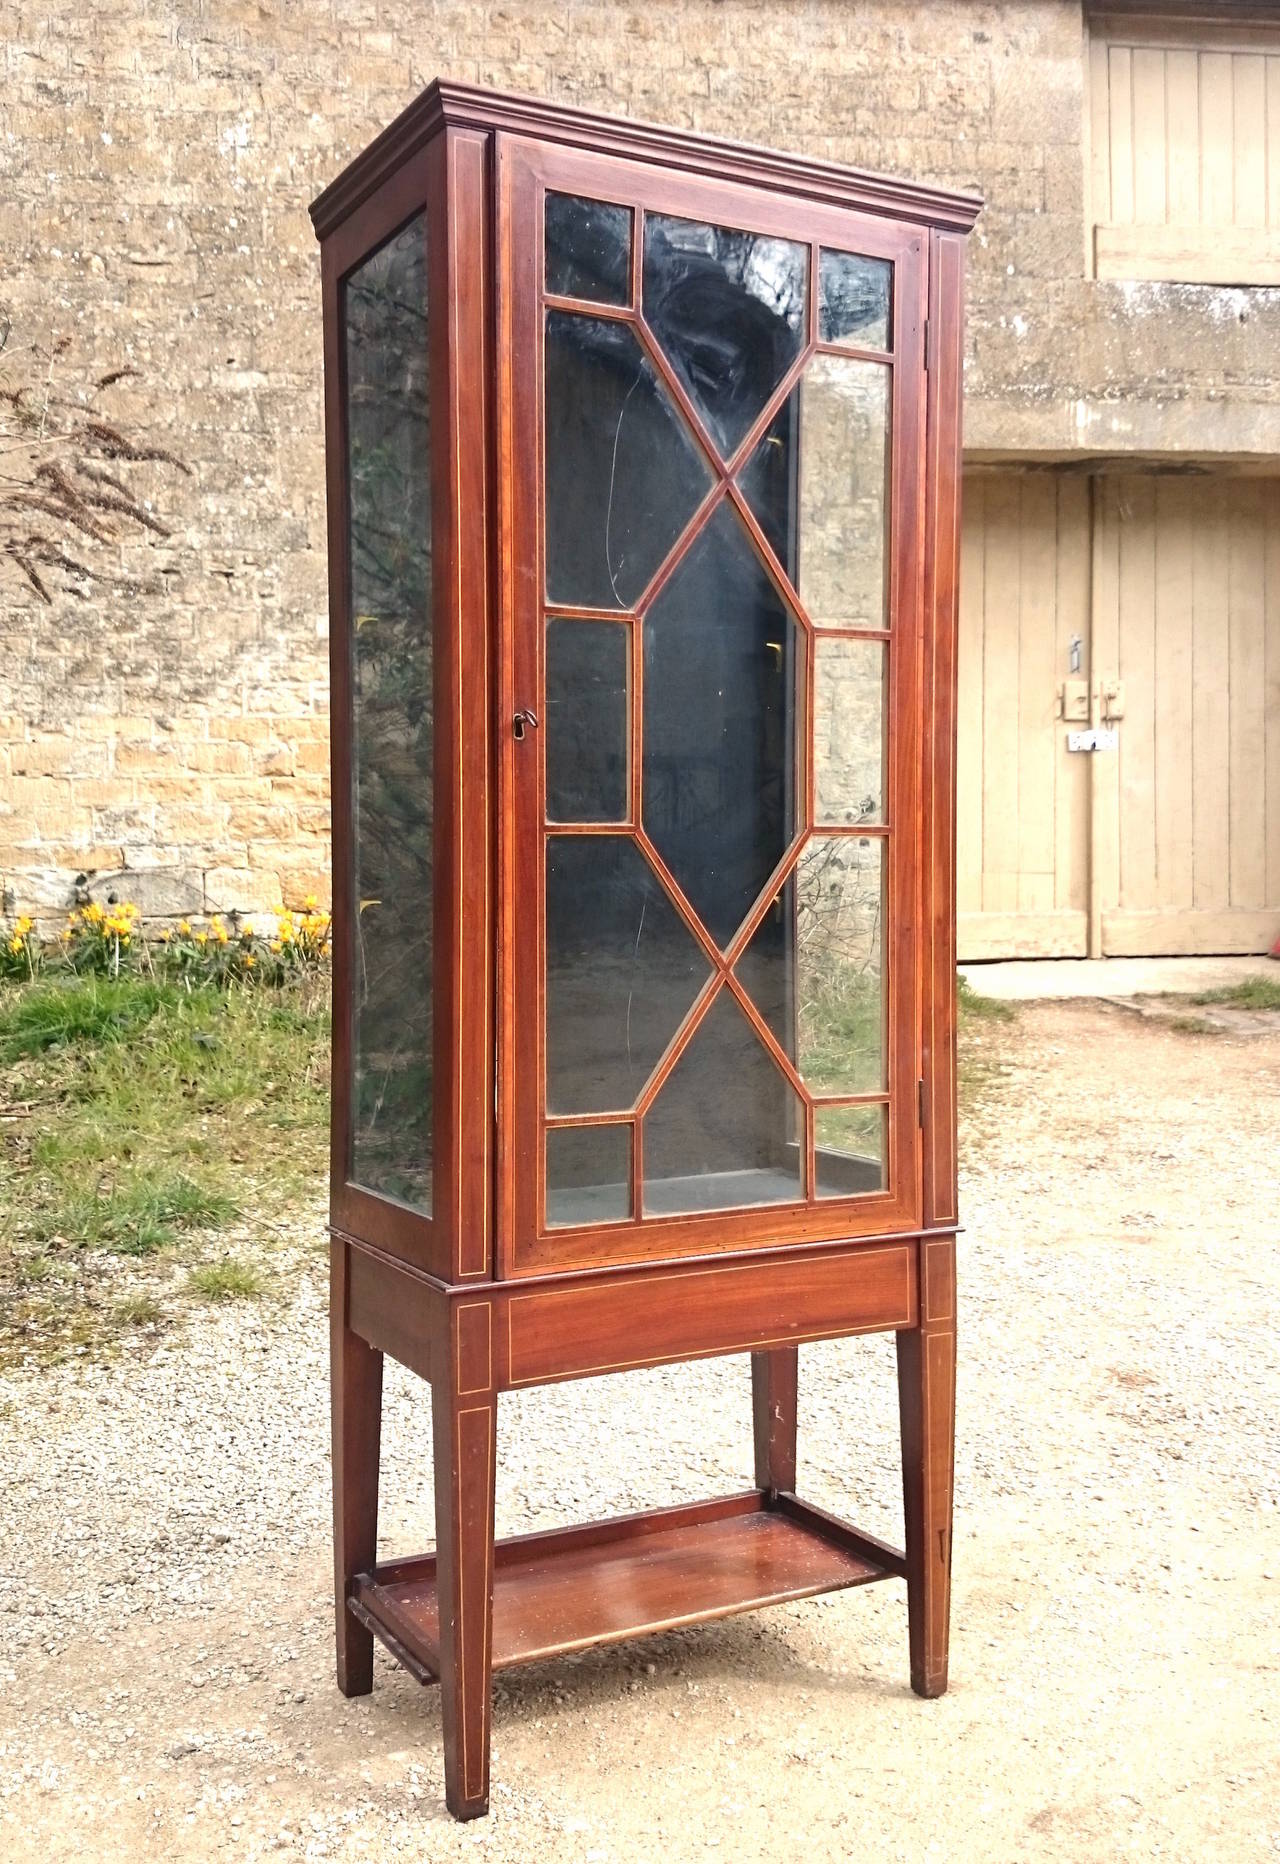 Antique cabinet with three glass shelves, working lock and key. It is made of mahogany with boxwood stringing and inlay. This is a wonderful quality and useful cabinet with only a few marks commensurate with the age of the piece. The glass shelves